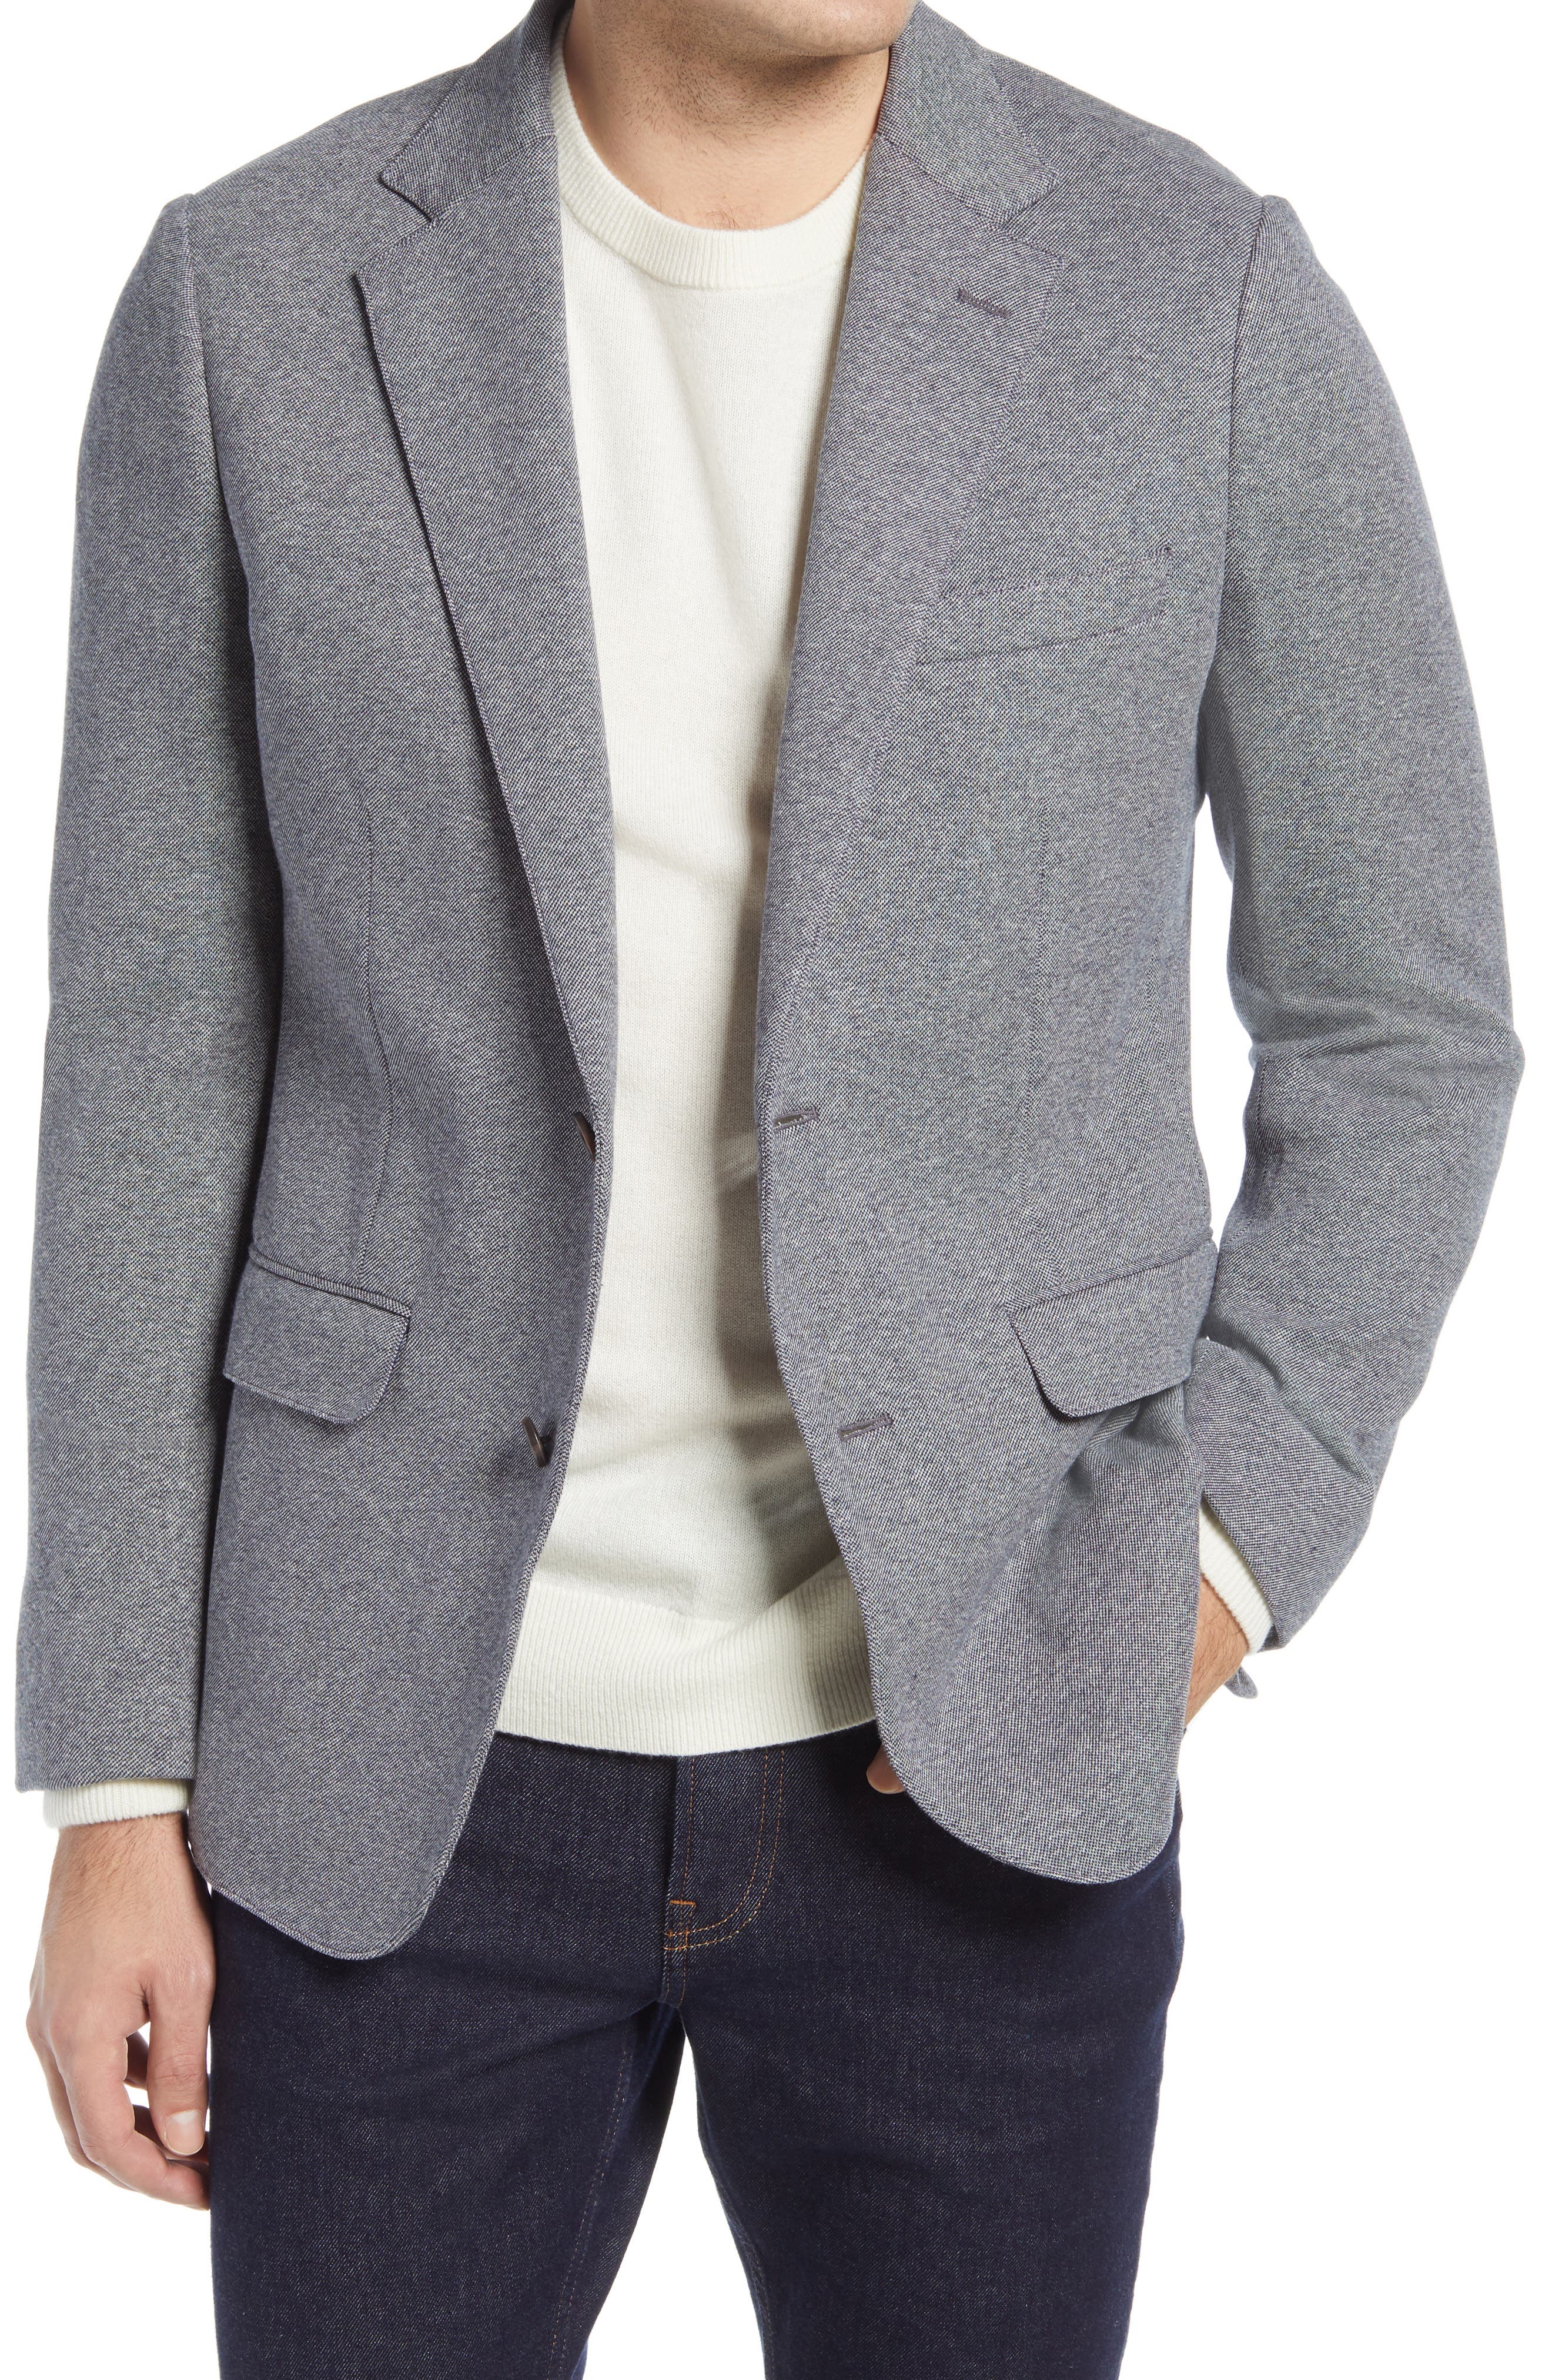 mens sport jacket and jeans